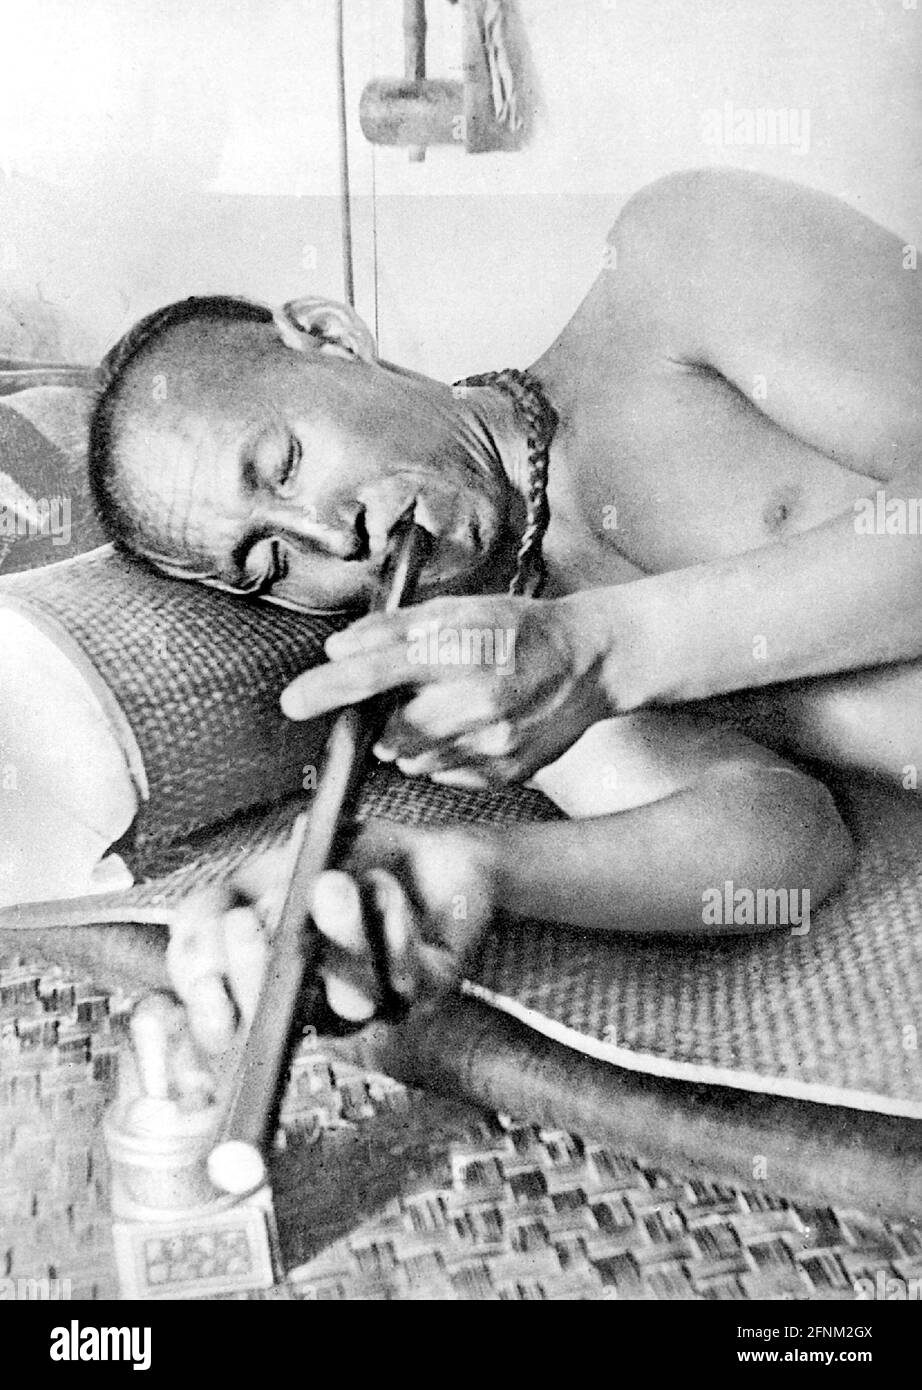 drugs and dope, opium, man smoking opium pipe, 20th century, historic, historical, narcotic drug, ADDITIONAL-RIGHTS-CLEARANCE-INFO-NOT-AVAILABLE Stock Photo